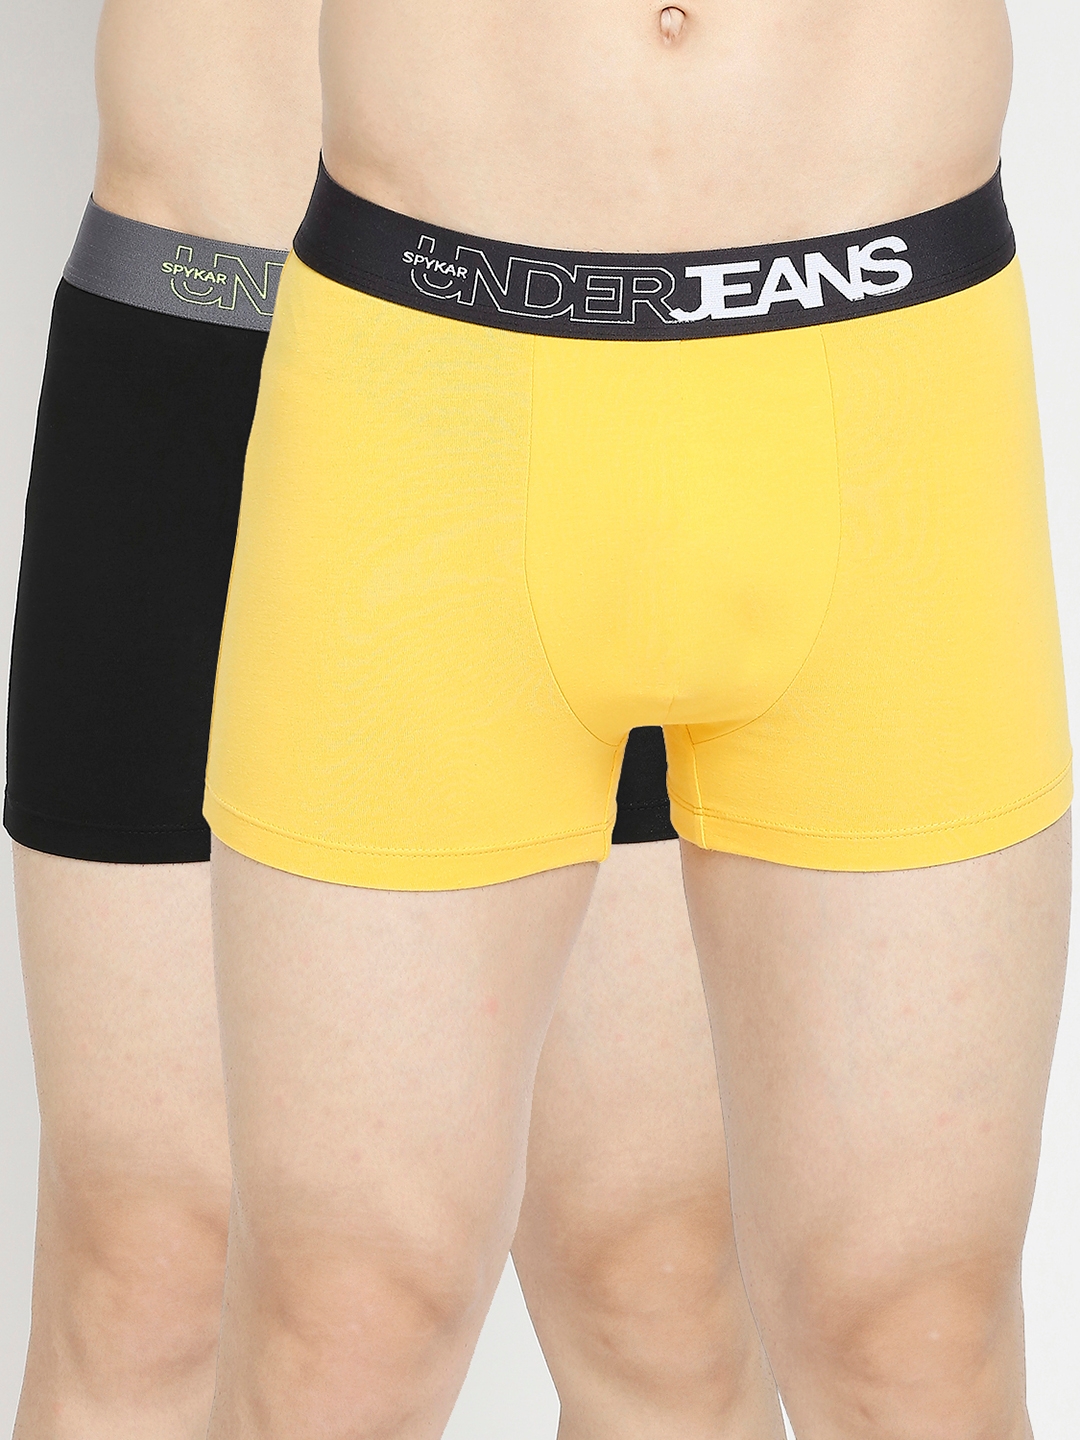 Underjeans by Spykar Yellow & Black Cotton Blend Trunk - Pack Of 2